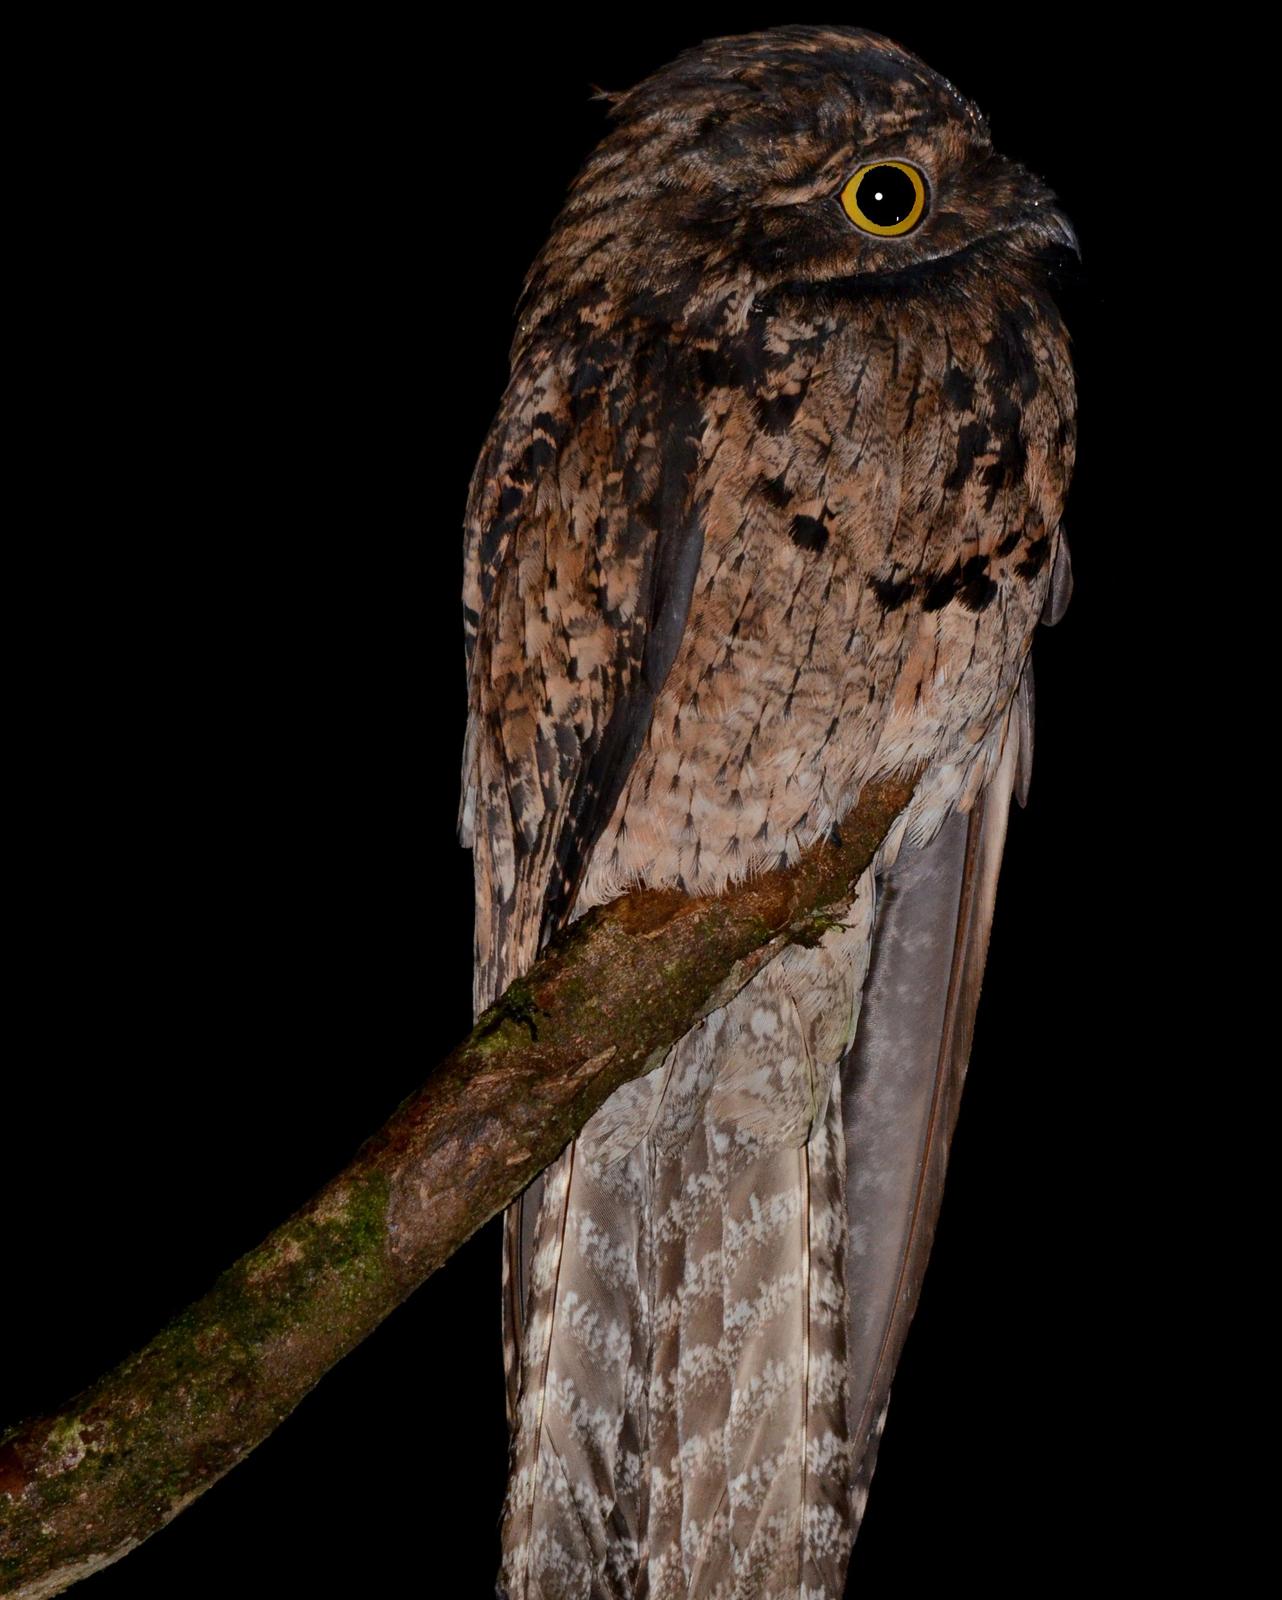 Common Potoo Photo by Lev Frid